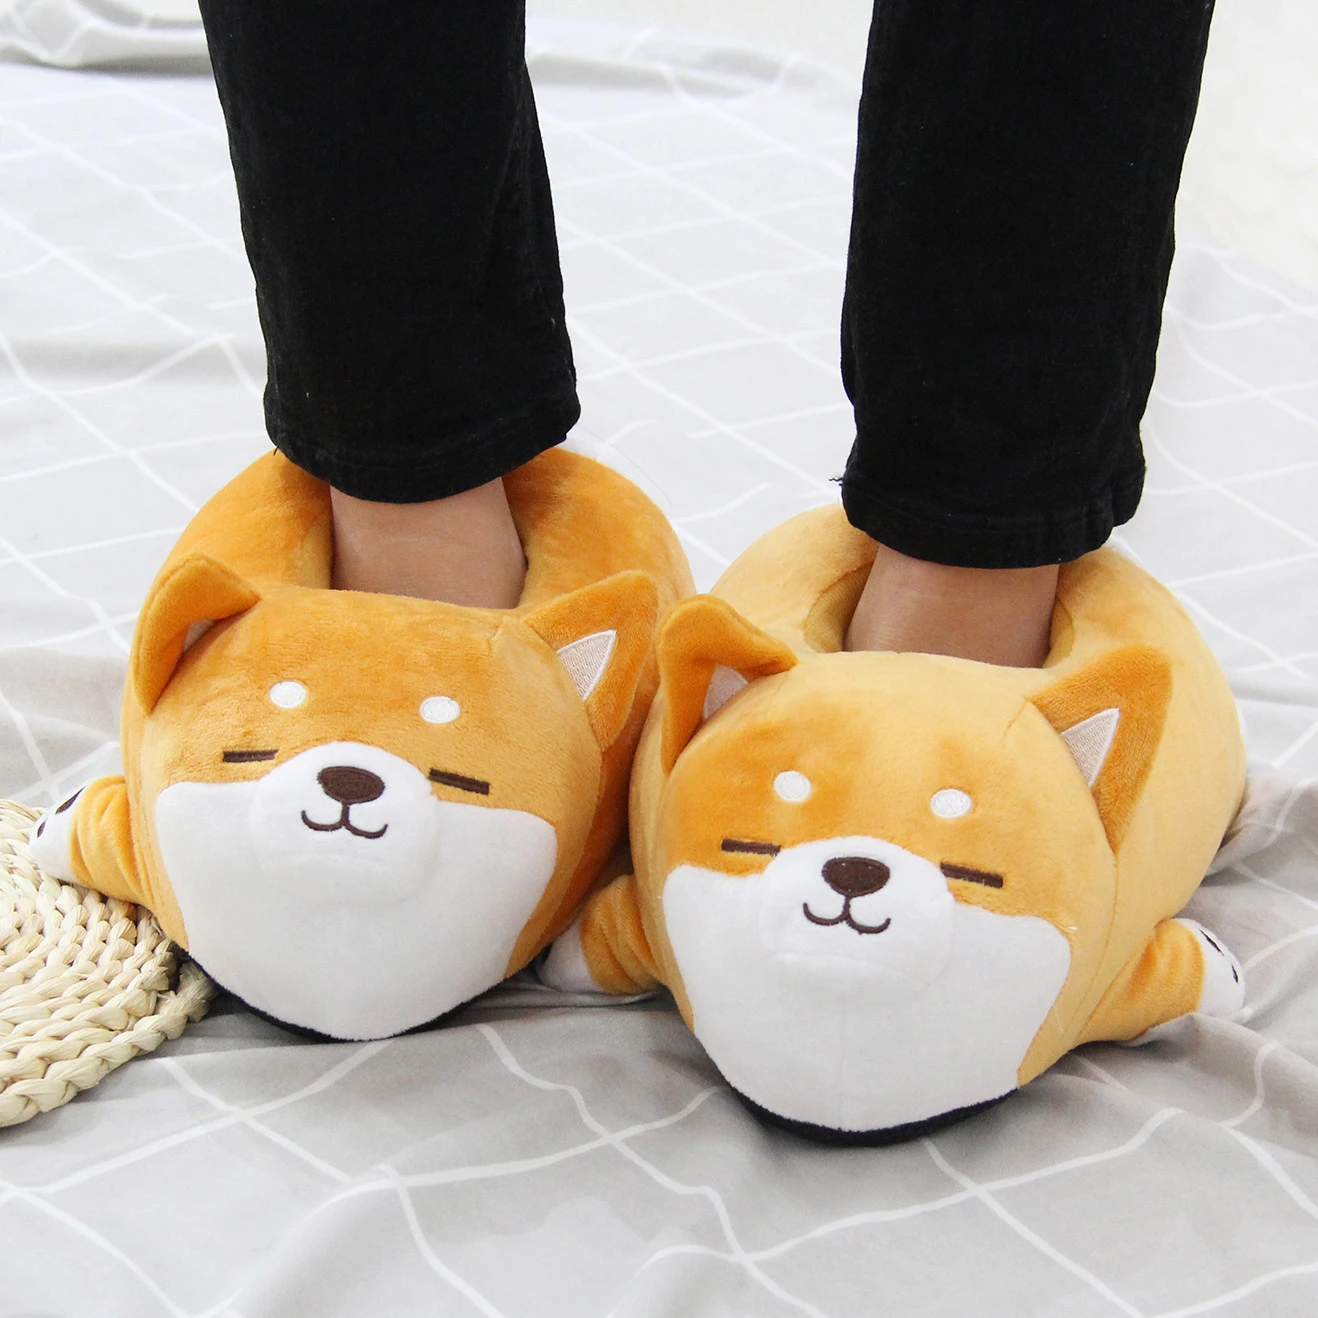 Funny Slipper 2021 Cute Soft Cute Lazy Shiba Inu Dog Slippers Animal Puppy Home Plush Cotton Shoes soft sole indoor slippers